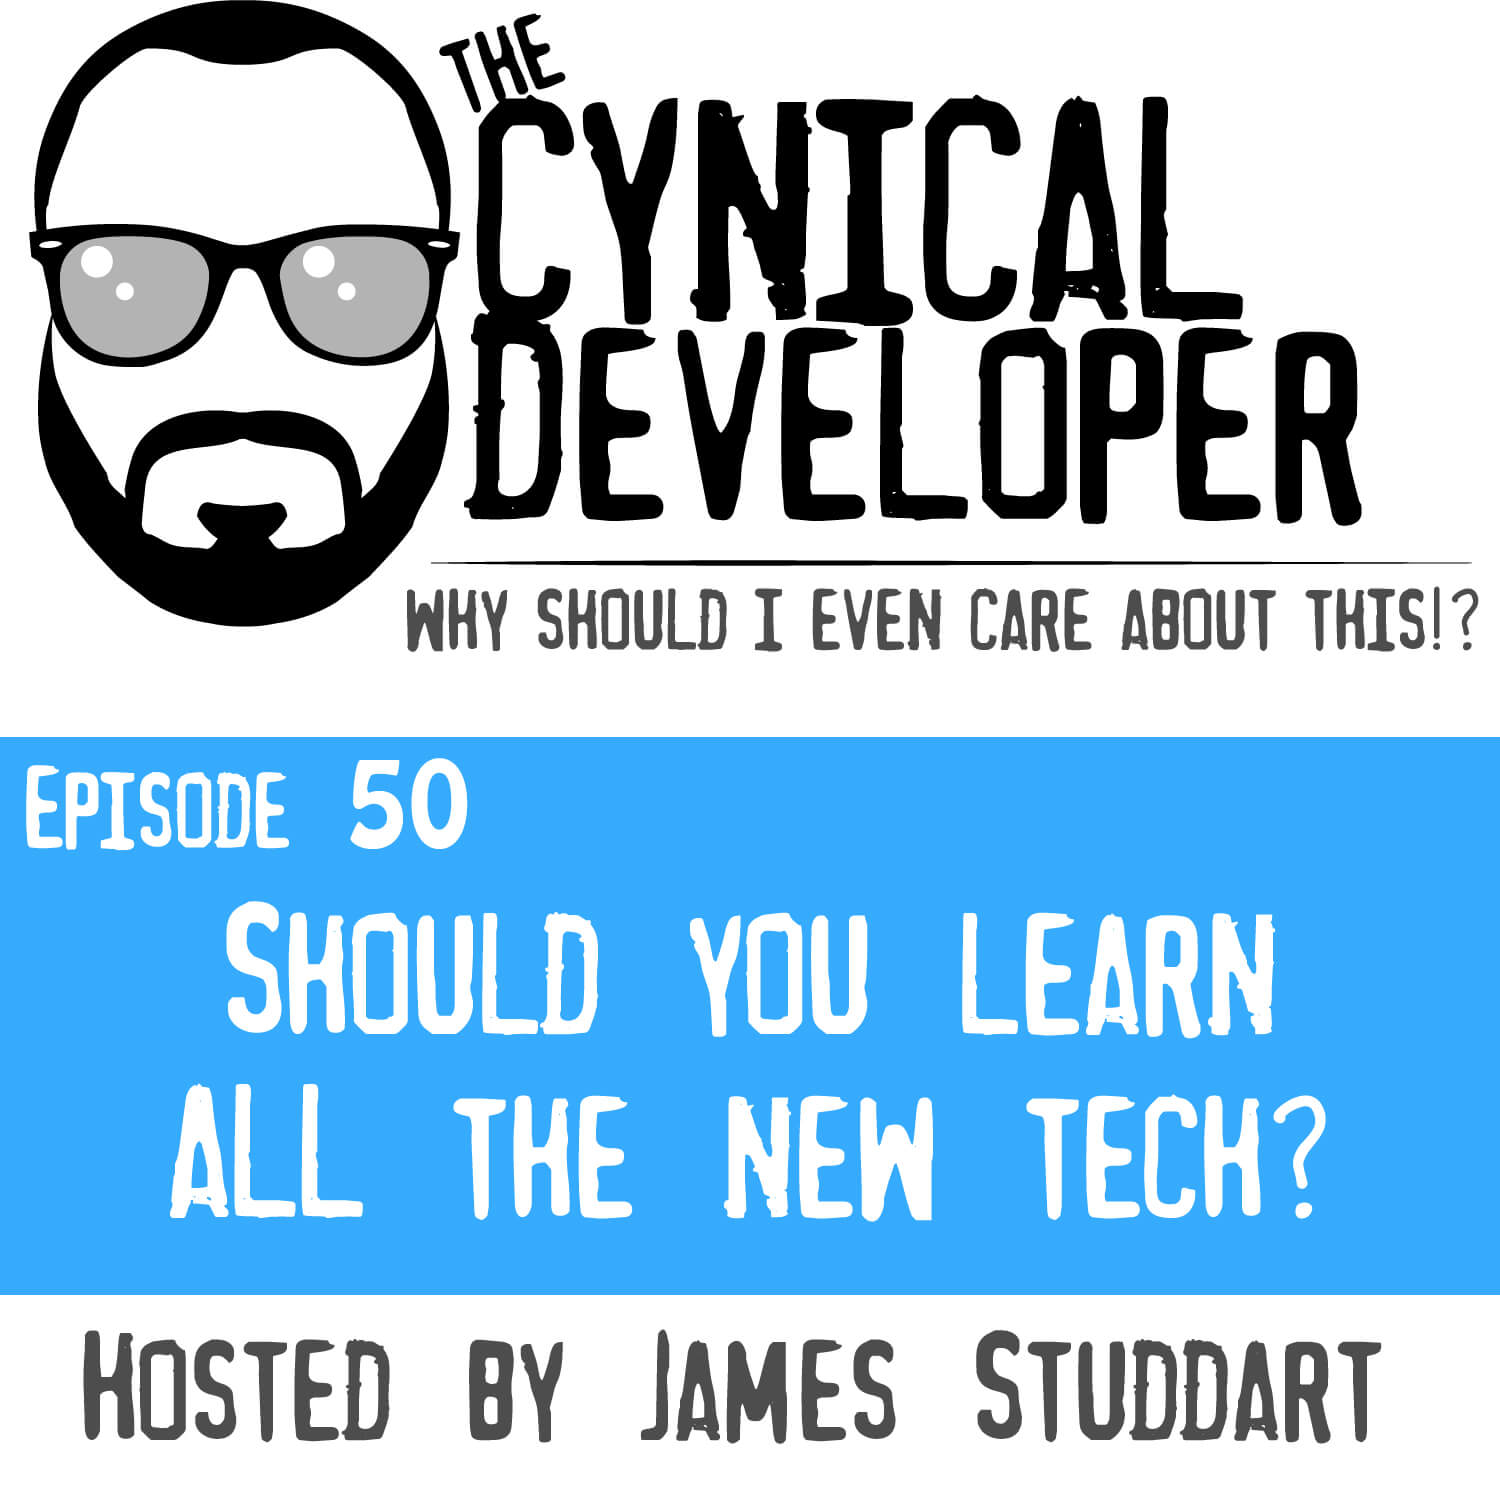 Episode 50 - Should you learn ALL the new tech?